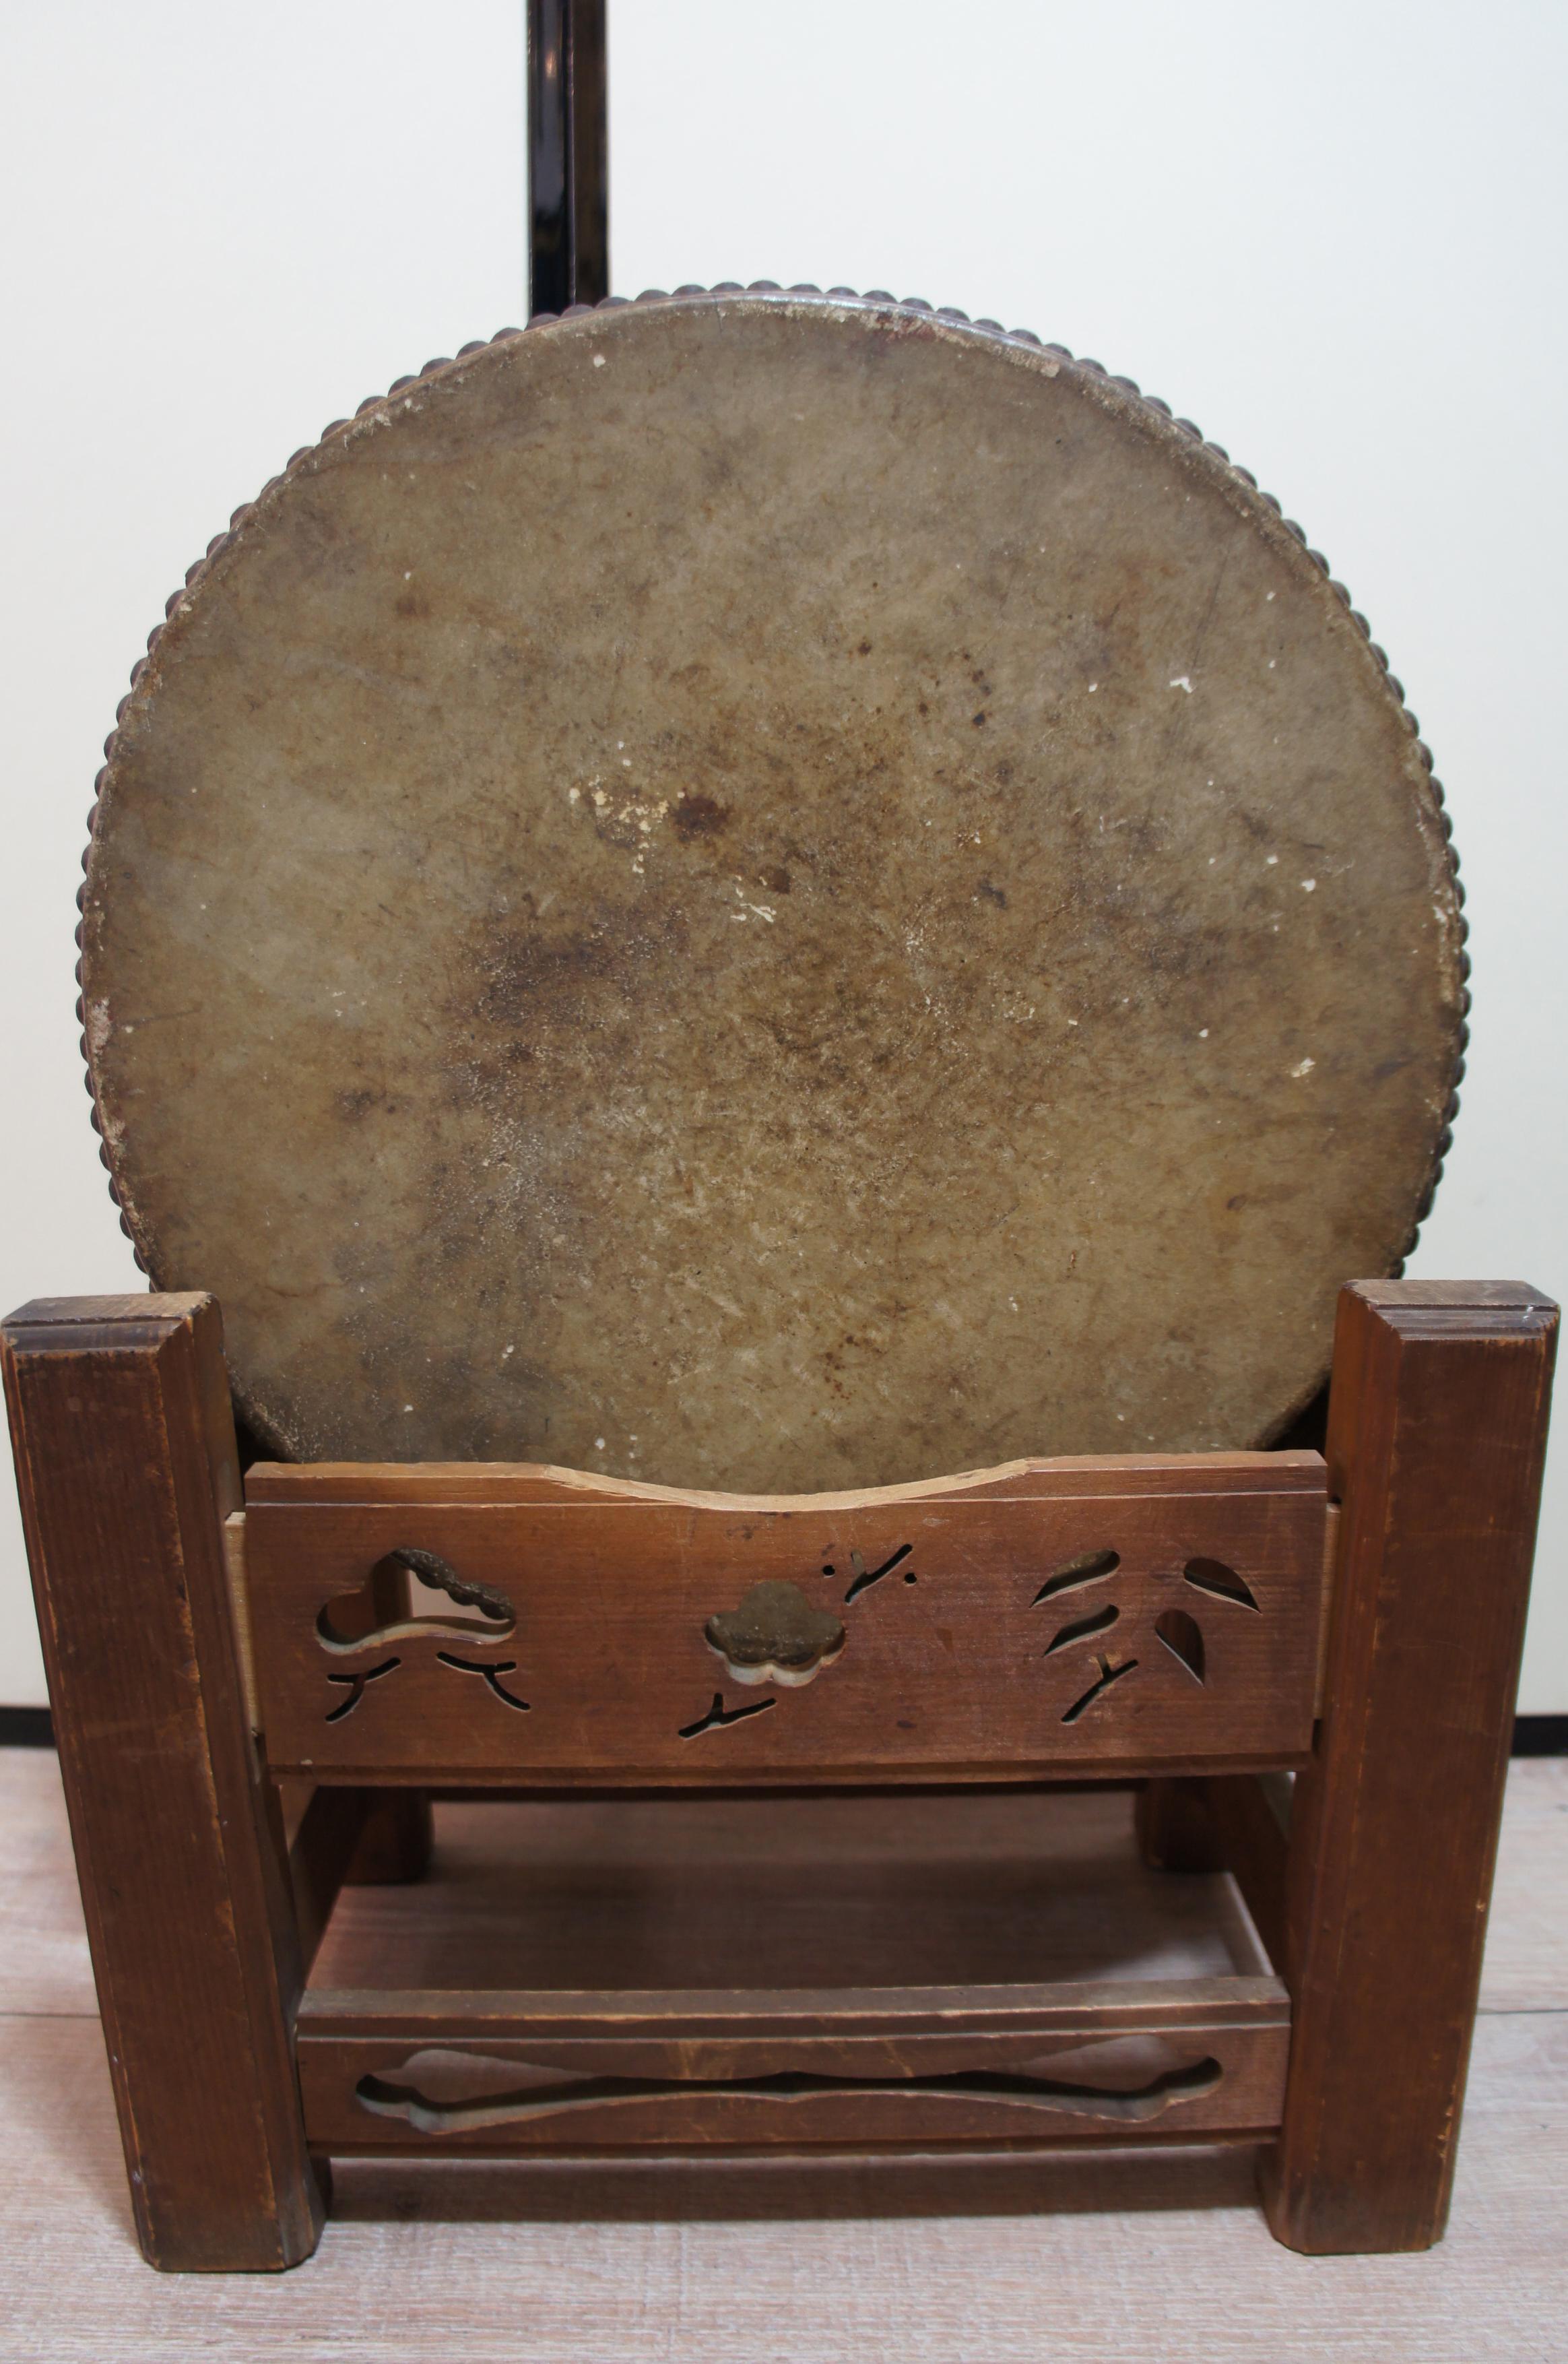 Beautiful grained keyaki wood flat drum with iron handles and iron tacks.
This Hira Taiko is Japanese traditional flat drum for the festival. The skin is made of buffalo’s hide.
It had been made by 